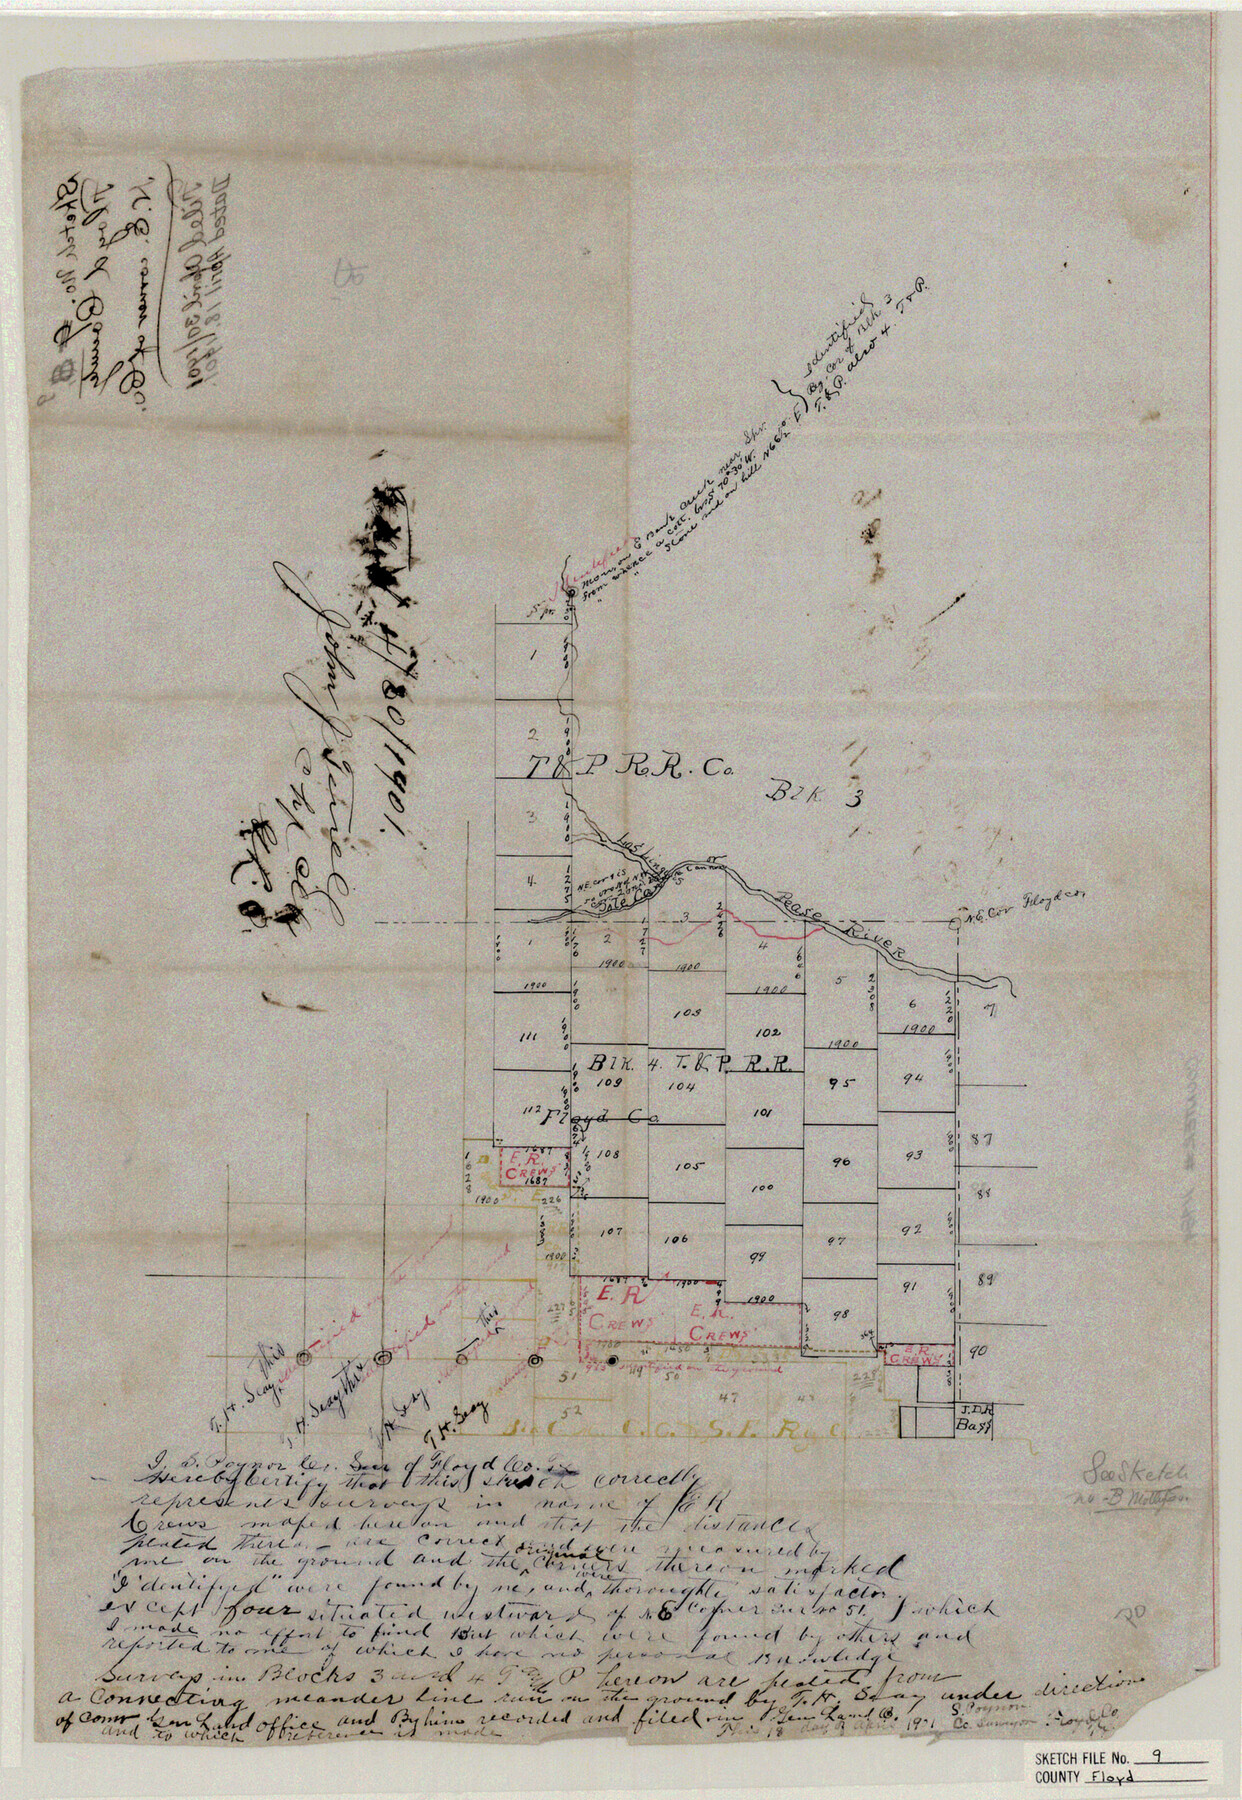 11484, Floyd County Sketch File 9, General Map Collection